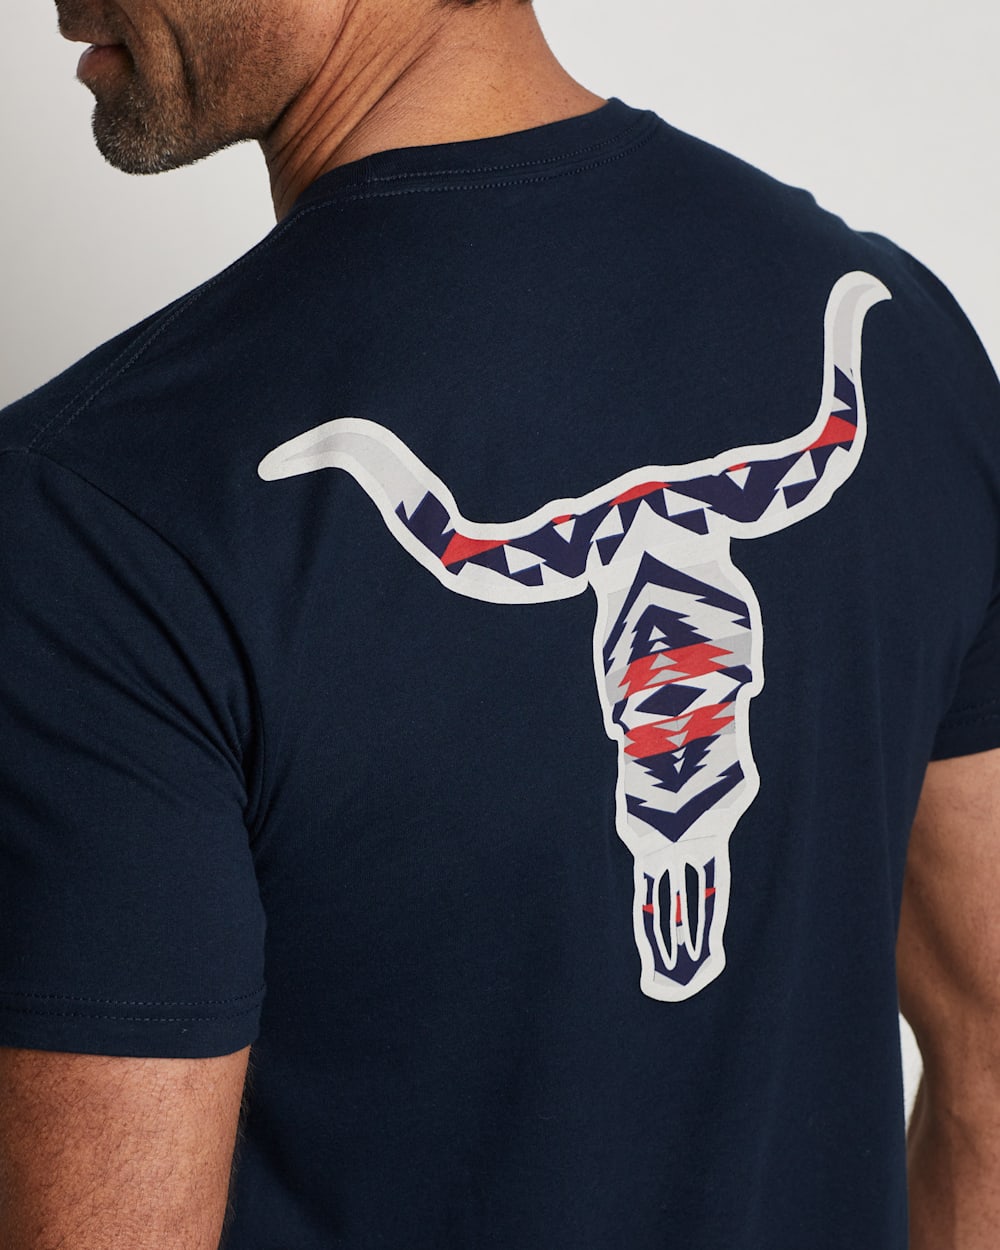 ALTERNATE VIEW OF MEN'S TECOPA HILLS LONGHORN GRAPHIC TEE IN MIDNIGHT NAVY/WHITE image number 2